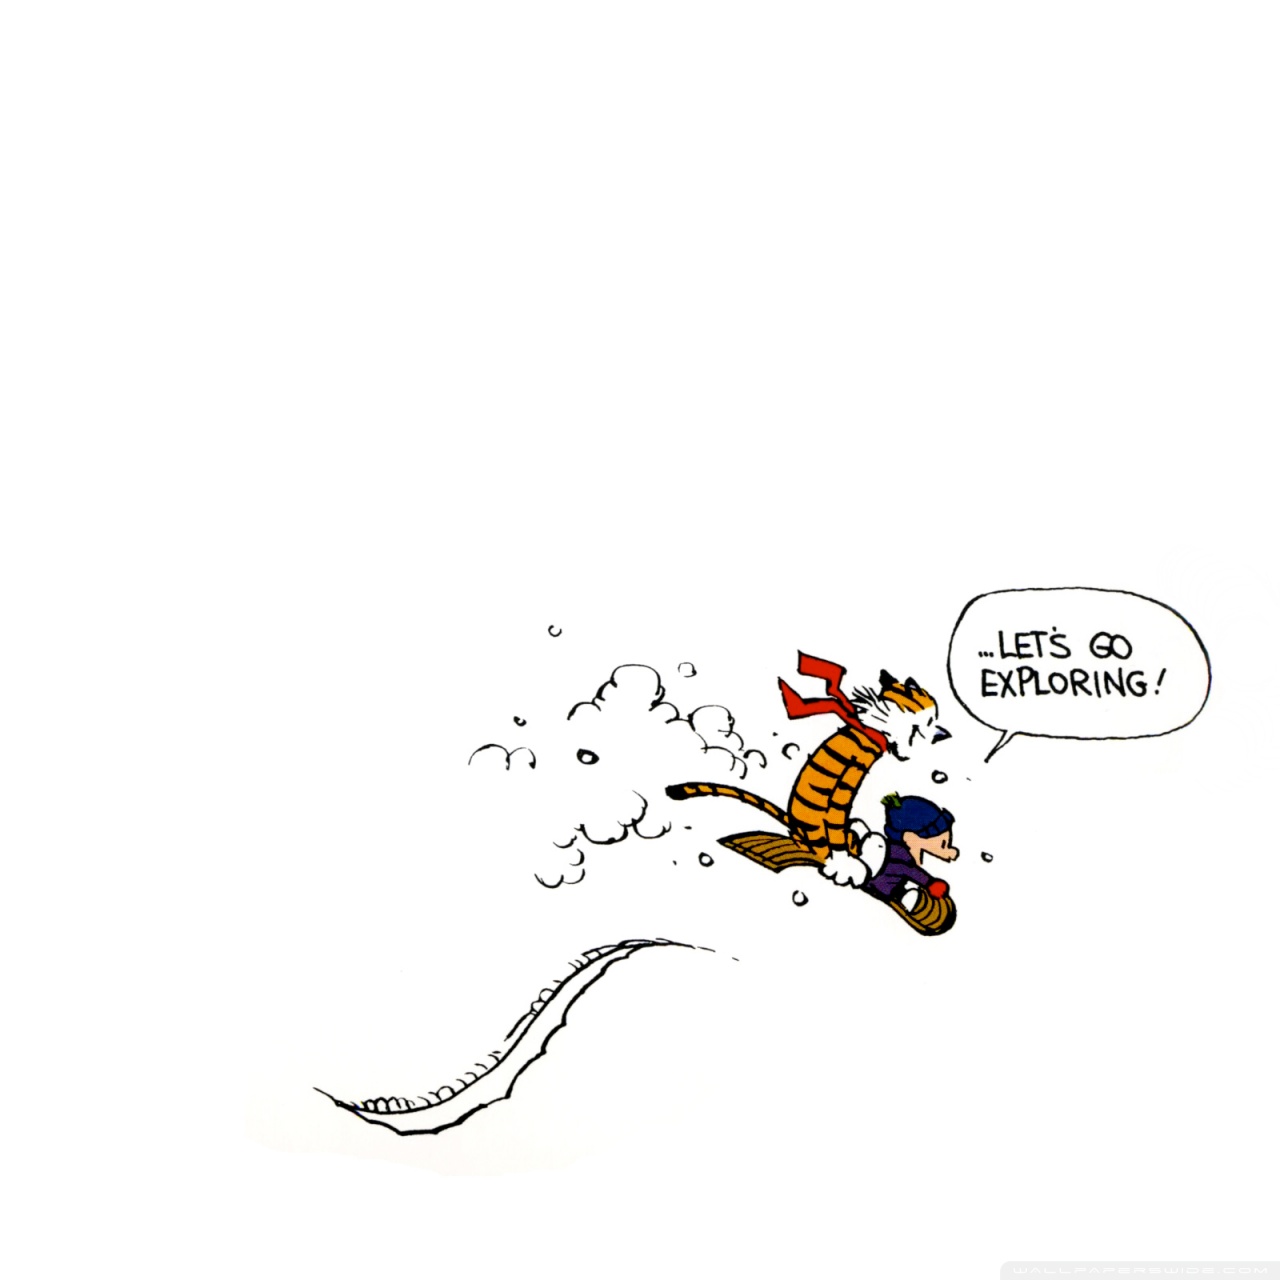 calvin and hobbes wallpapers  16801050 High Definition Wallpaper    Calvin and hobbes wallpaper Calvin and hobbes Calvin and hobbes quotes